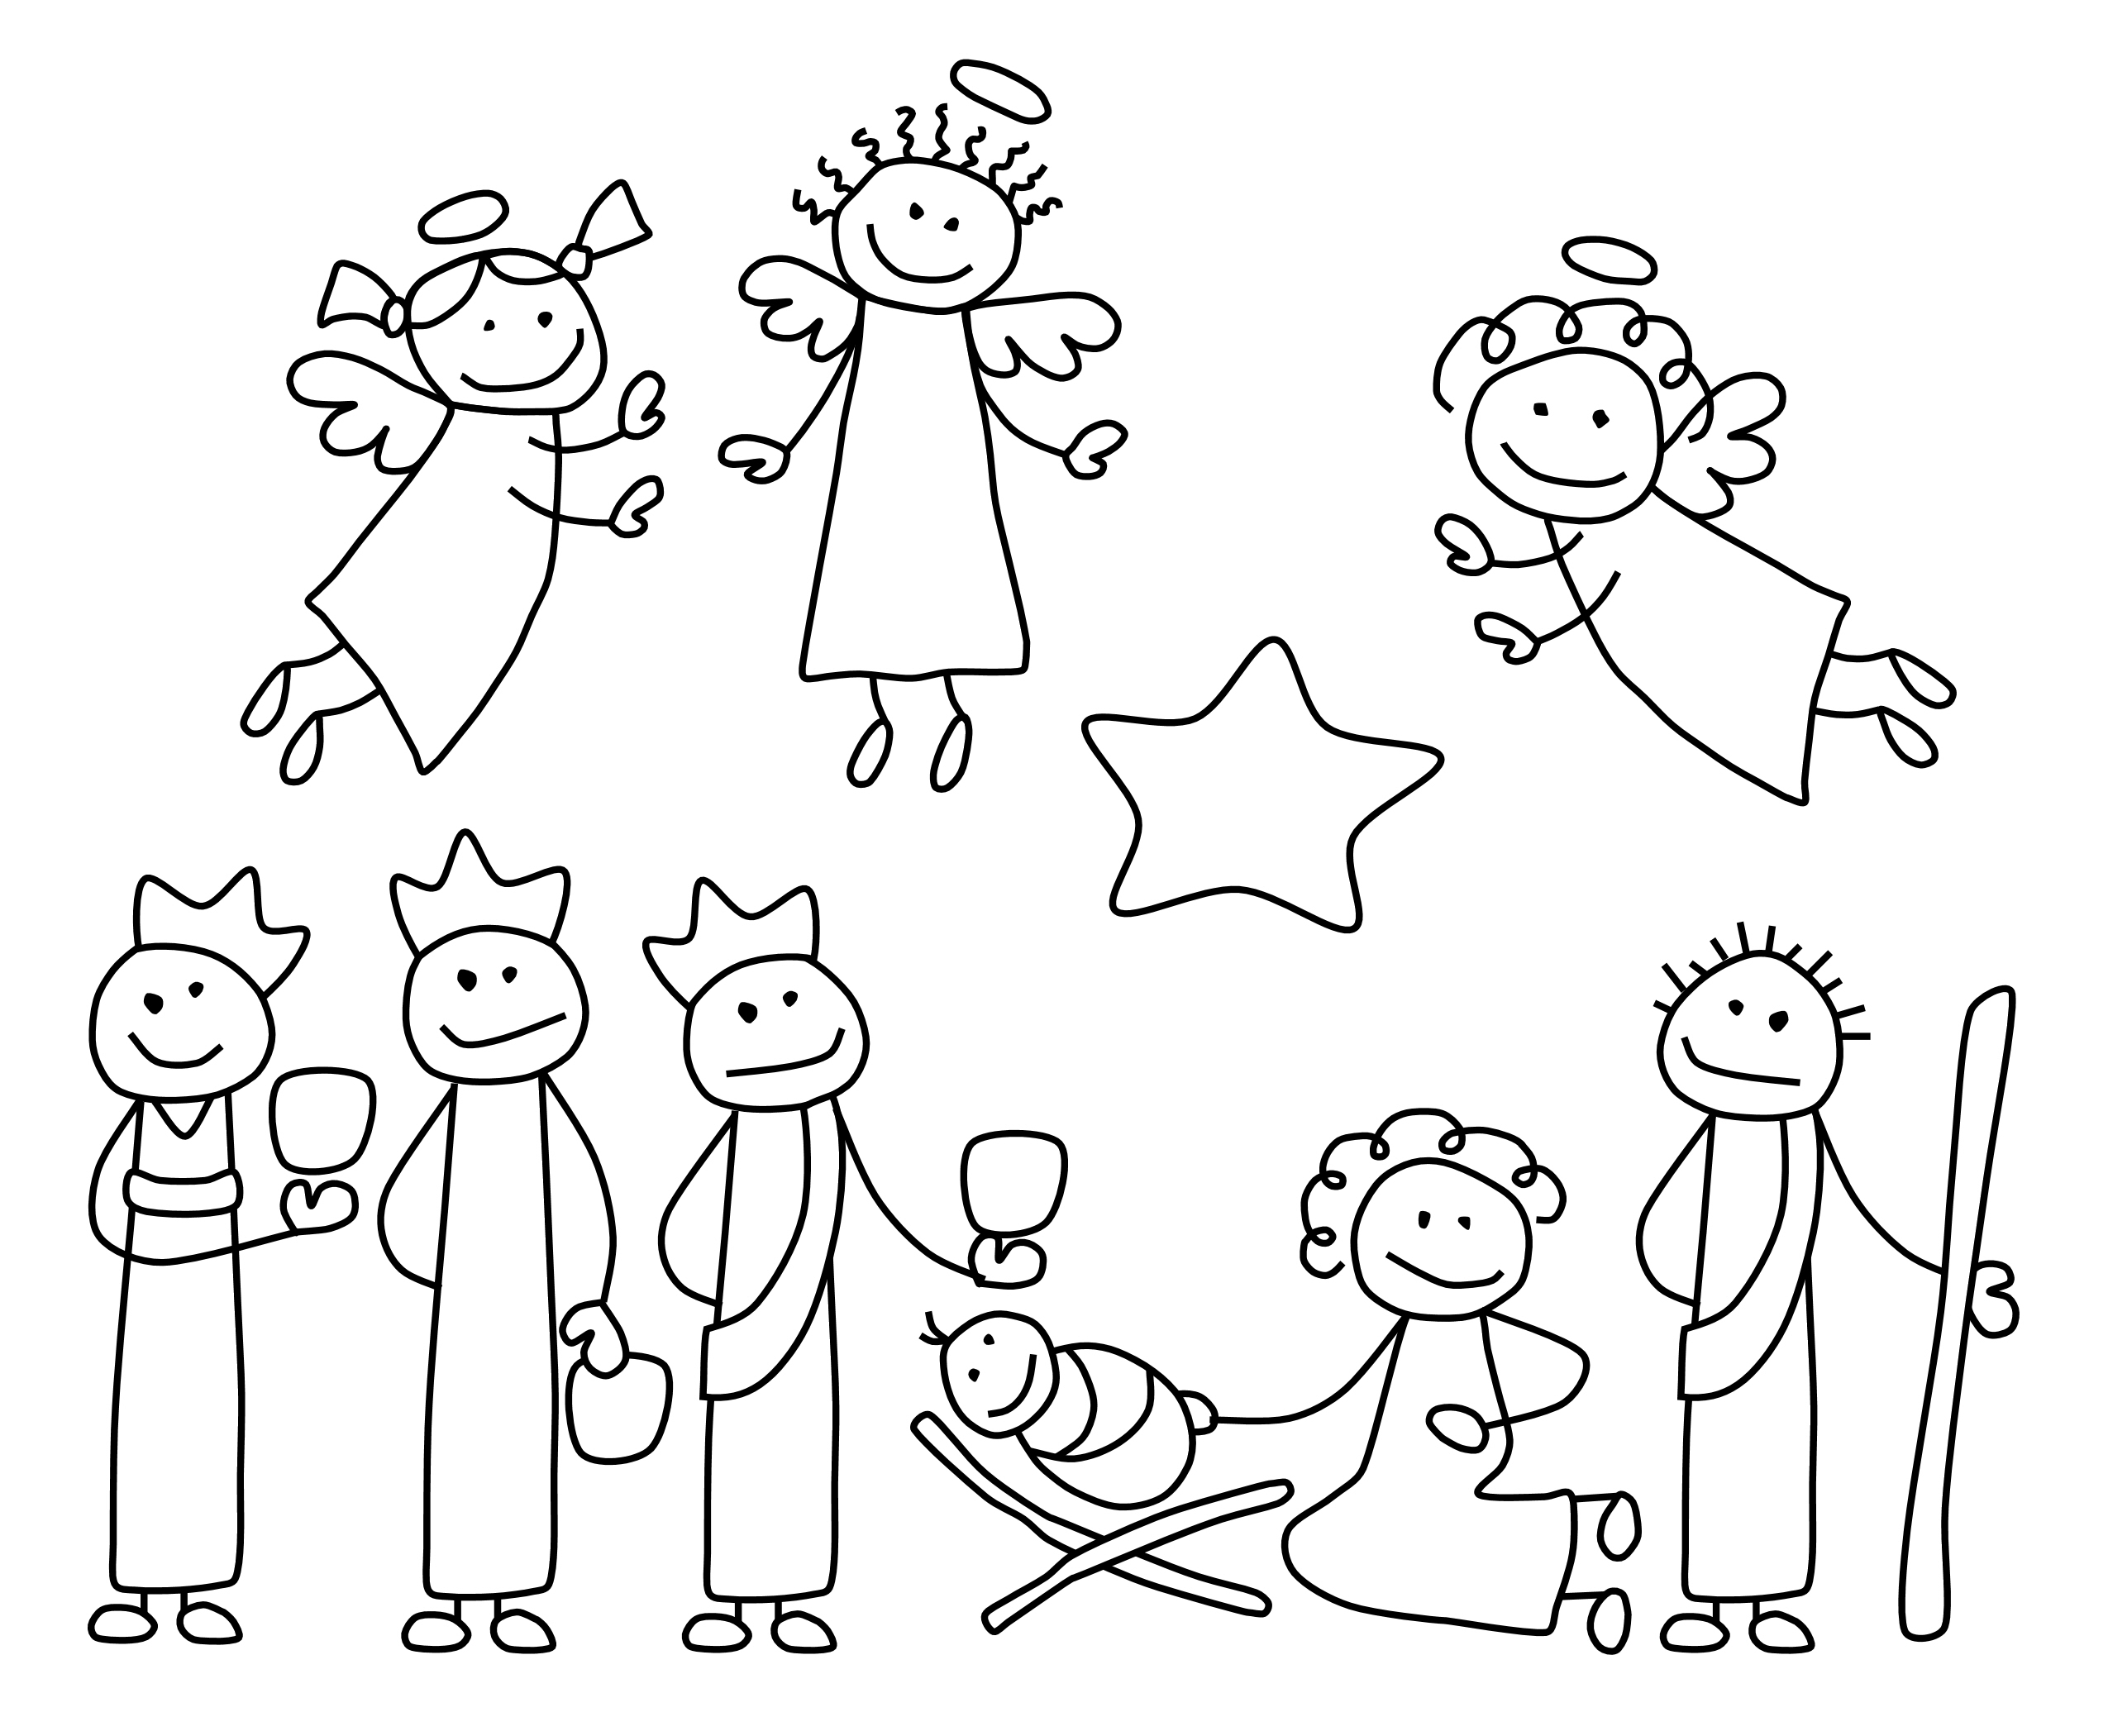 Stickman Coloring Pages at Free printable colorings